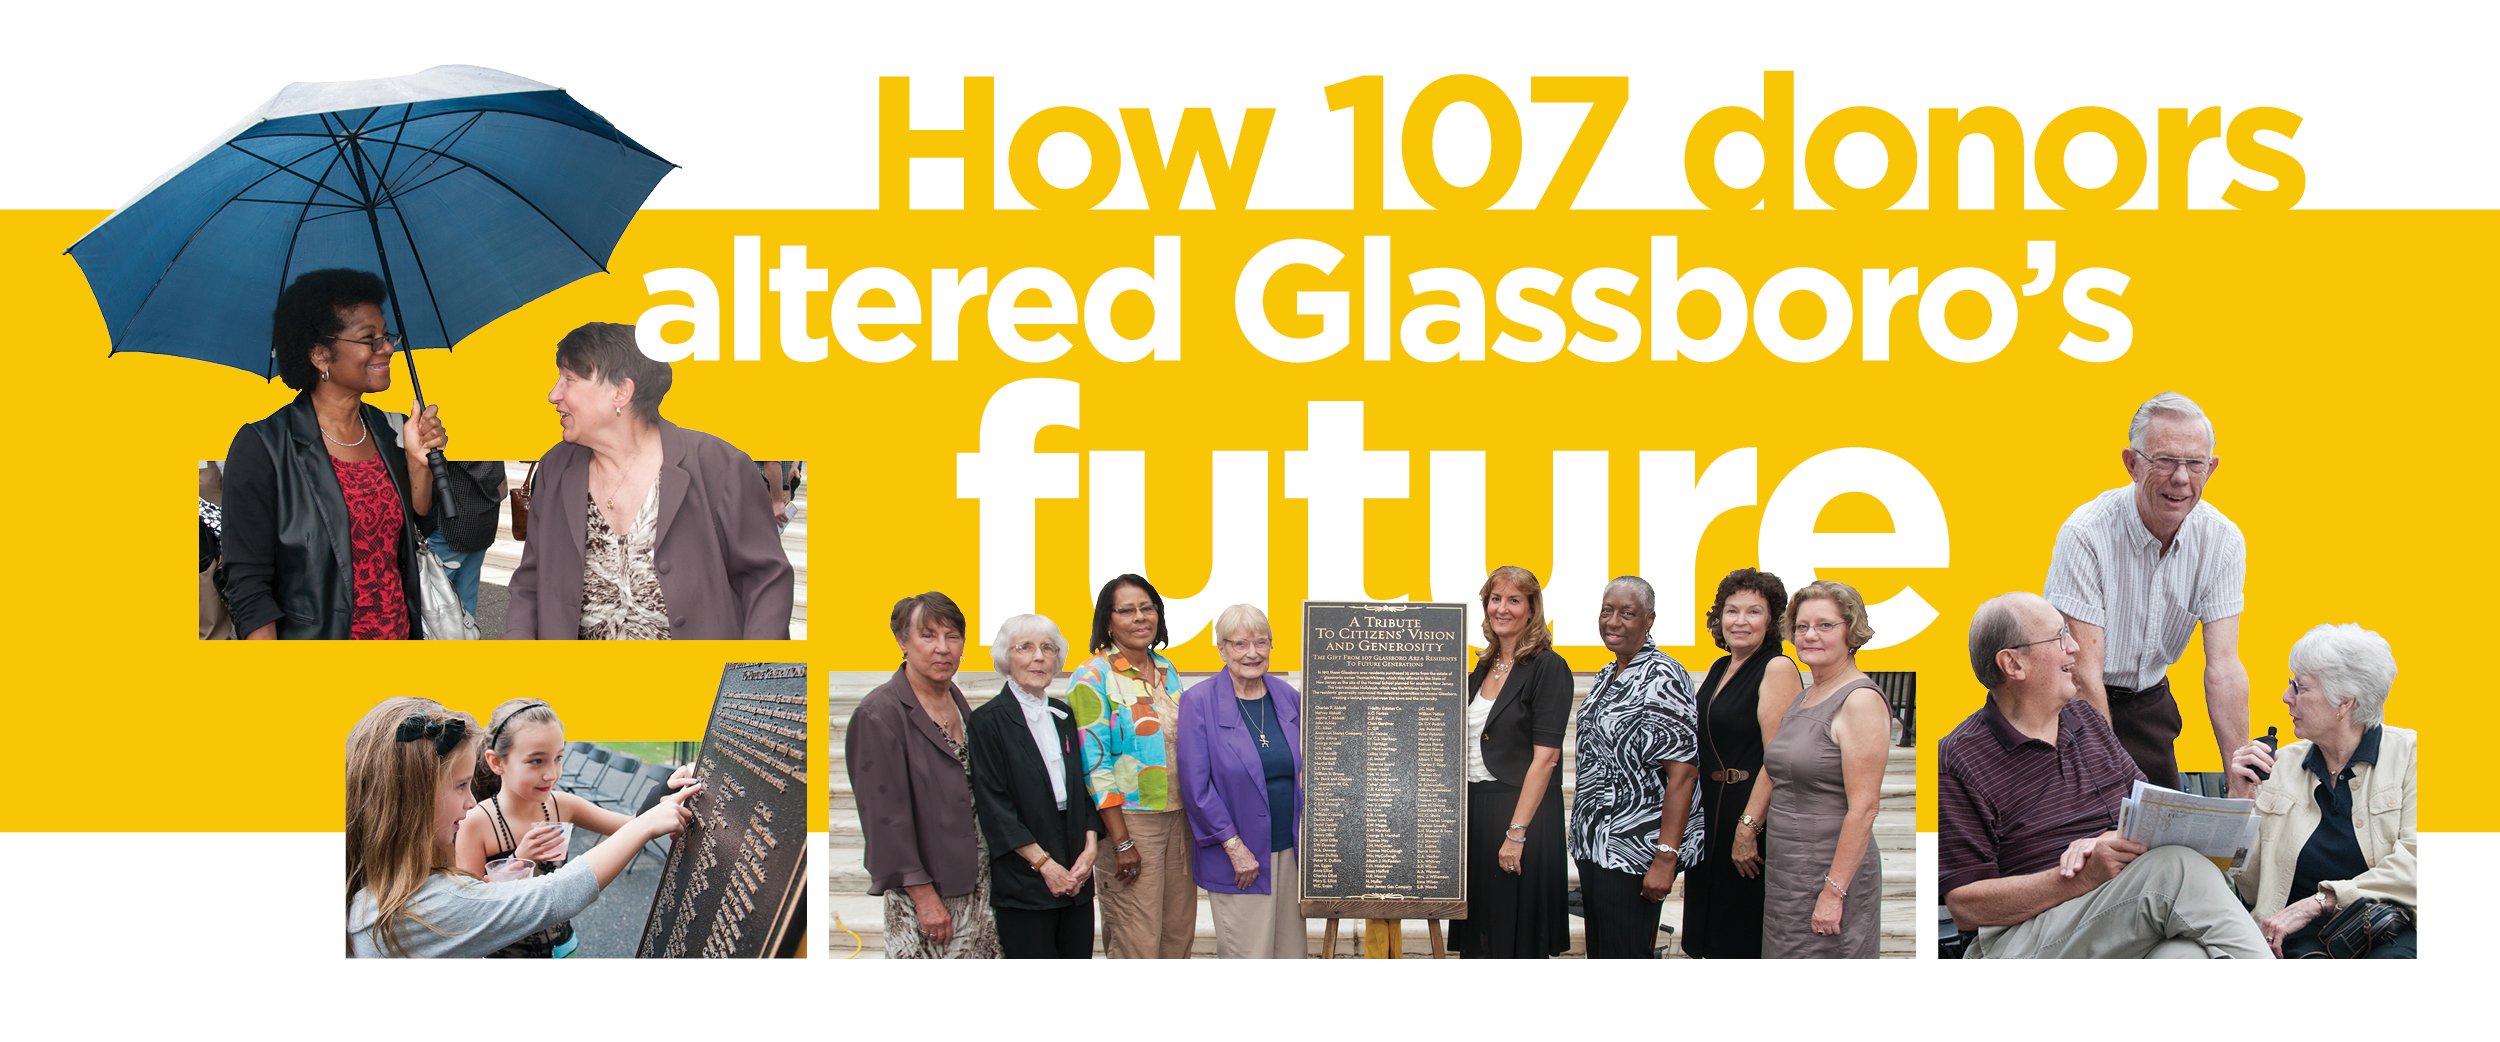 How 107 donors altered Glassboro's future